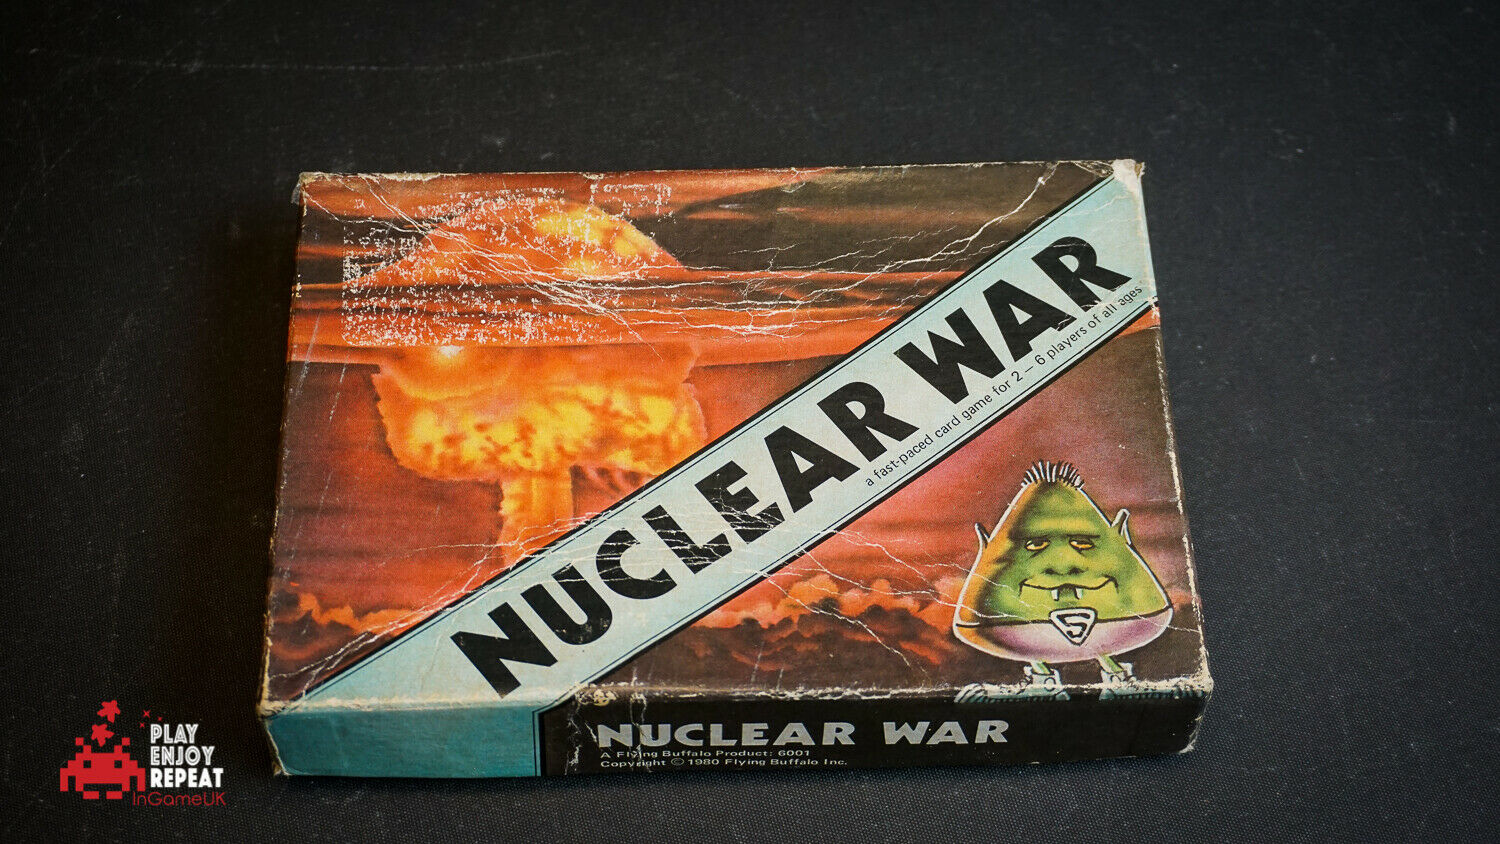 Nuclear War satirical war game for 2-6 players aged 10 up from Flying Buffalo